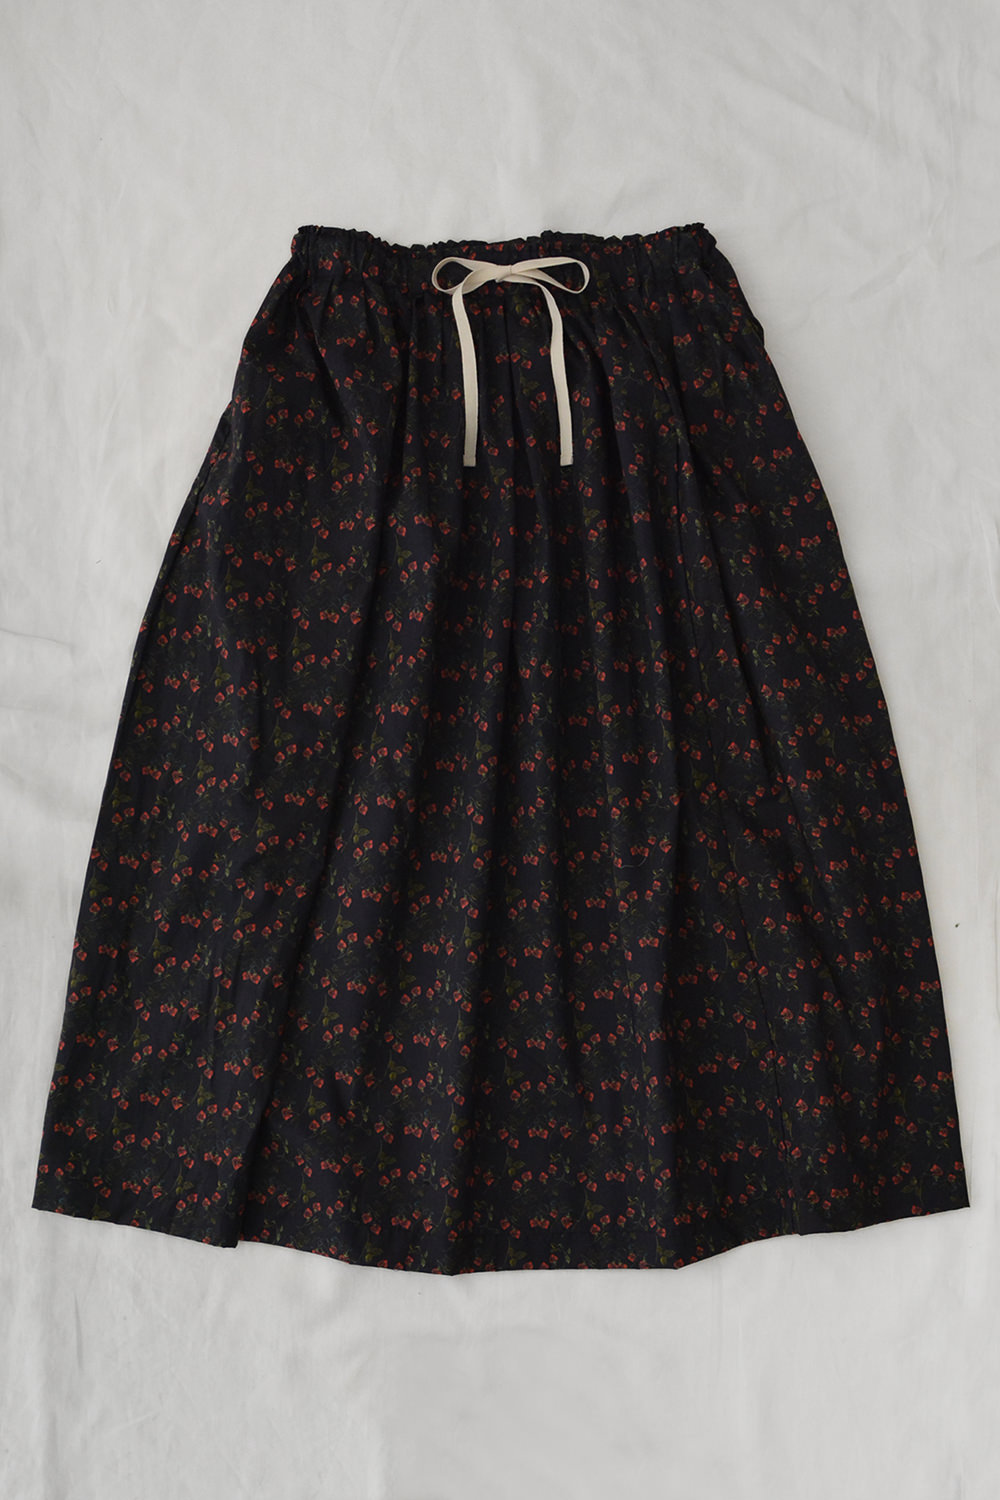 Skirt Strawberry Black Top Picture